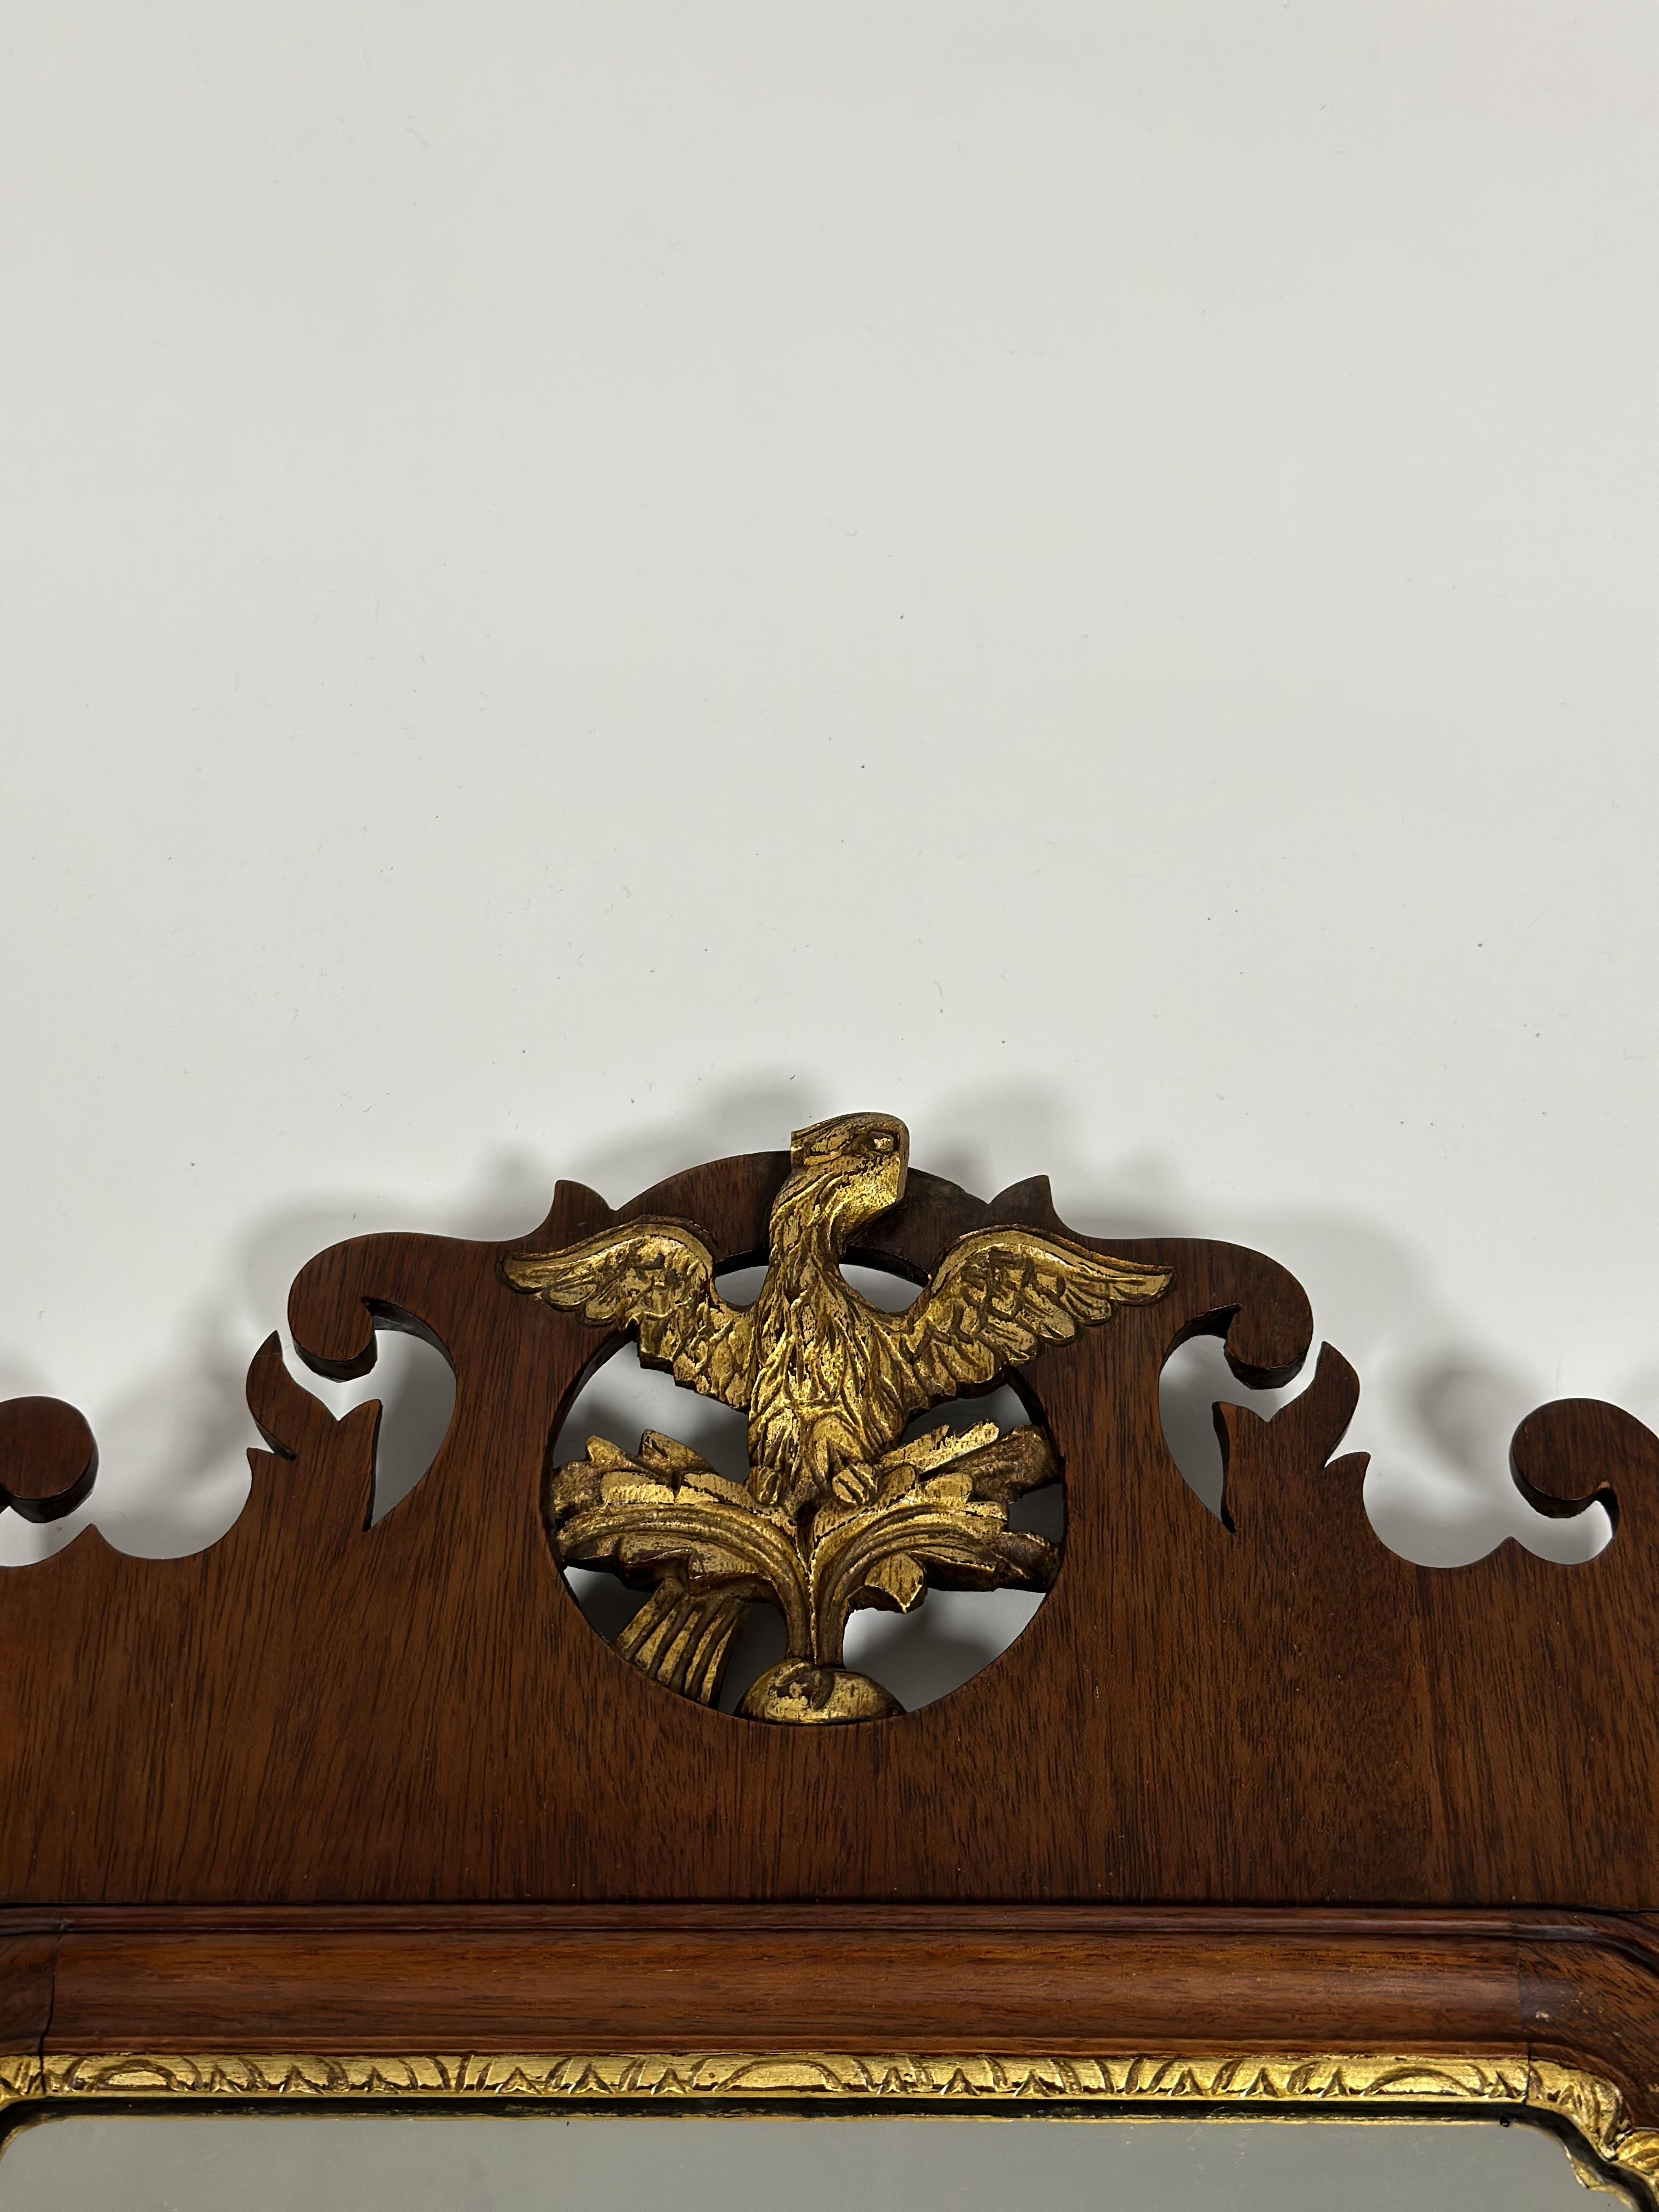 A George III style parcel-gilt walnut fretwork mirror, with ho-ho bird crest. Overall 71cm by 39cm - Image 2 of 2